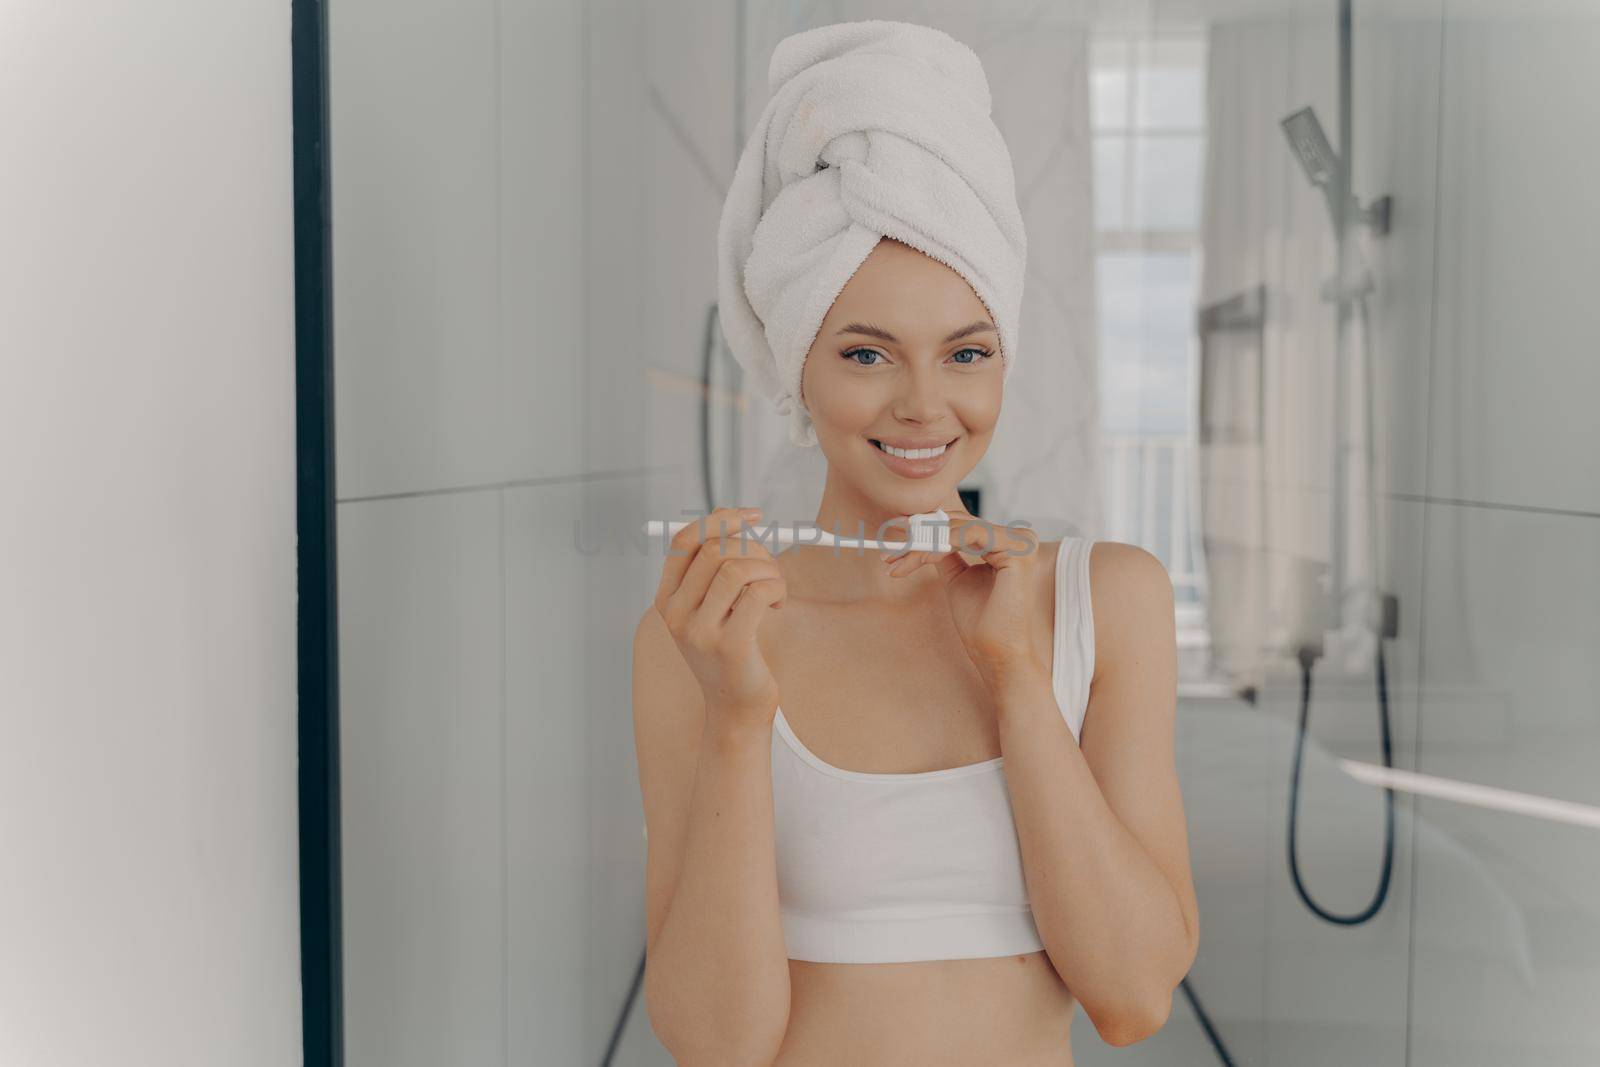 Happy beautiful lady with healthy perfect smile brushing teeth while standing in bathroom, wears towel wrapped on wet hair after morning shower. Personal body care and oral hygiene concept